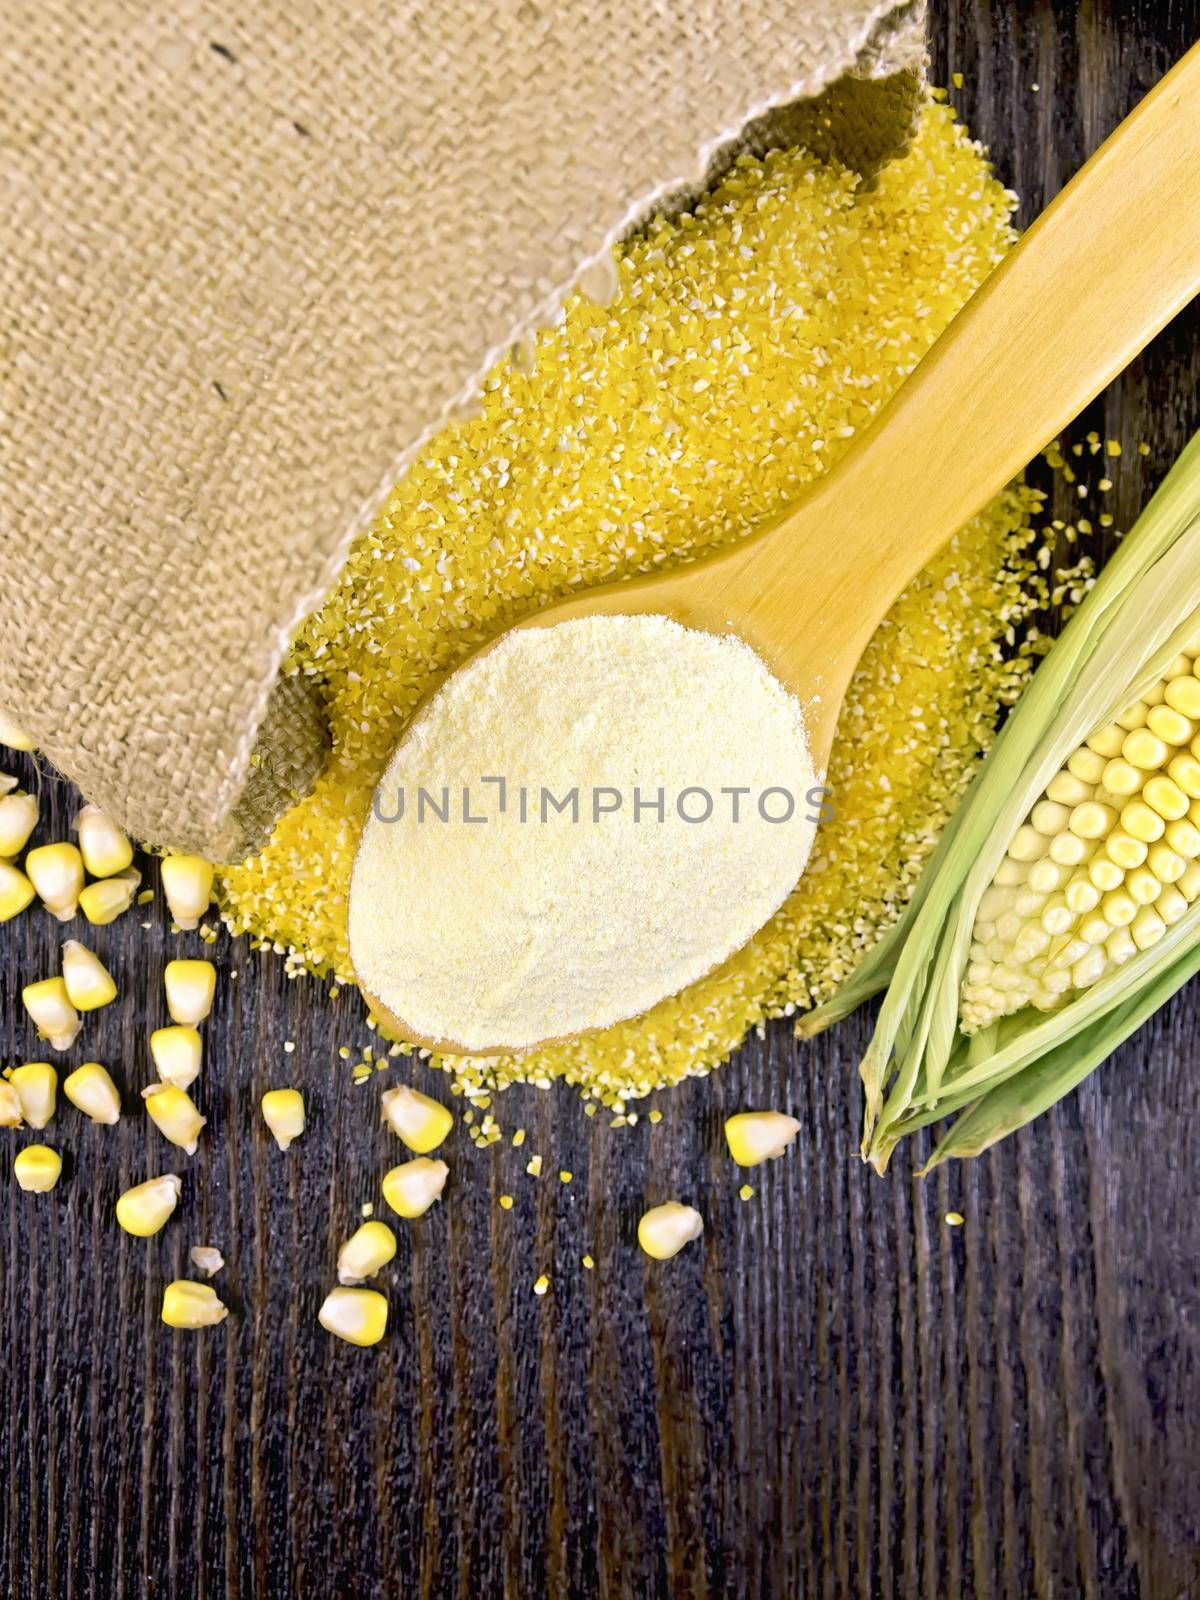 Flour corn in spoon with grains on board top by rezkrr